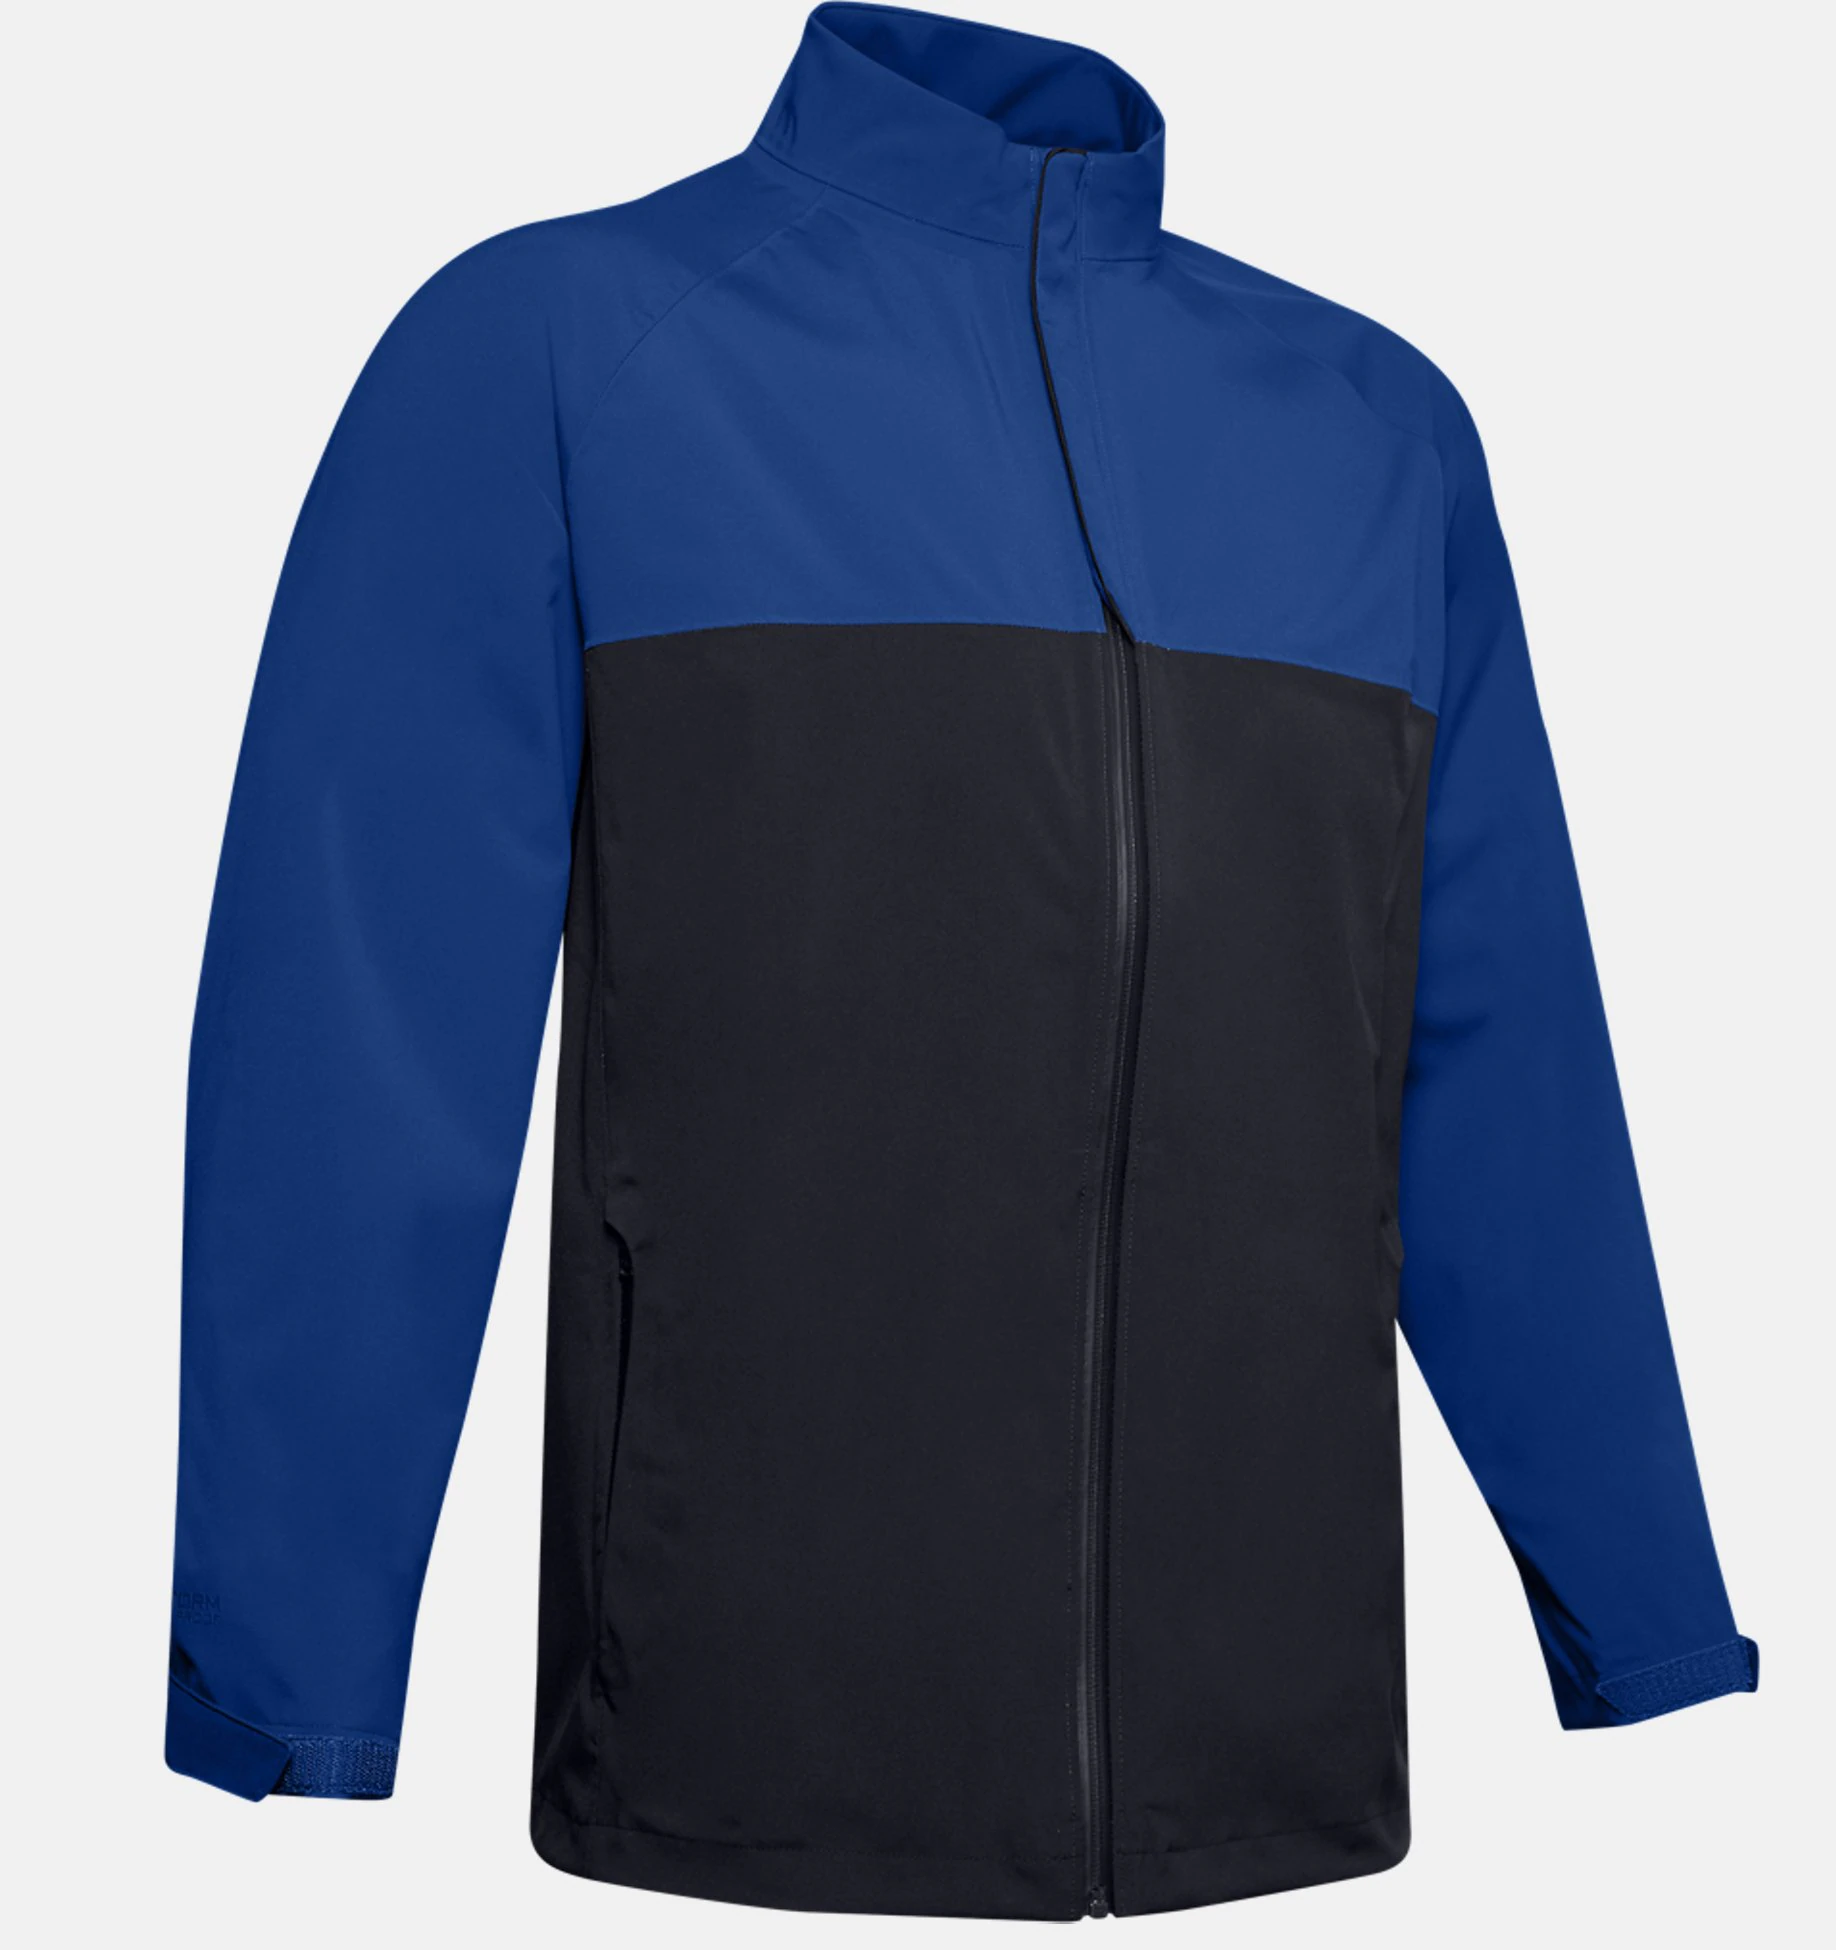 Under Armour Elements Rain Jacket in Blue #1342717 category image